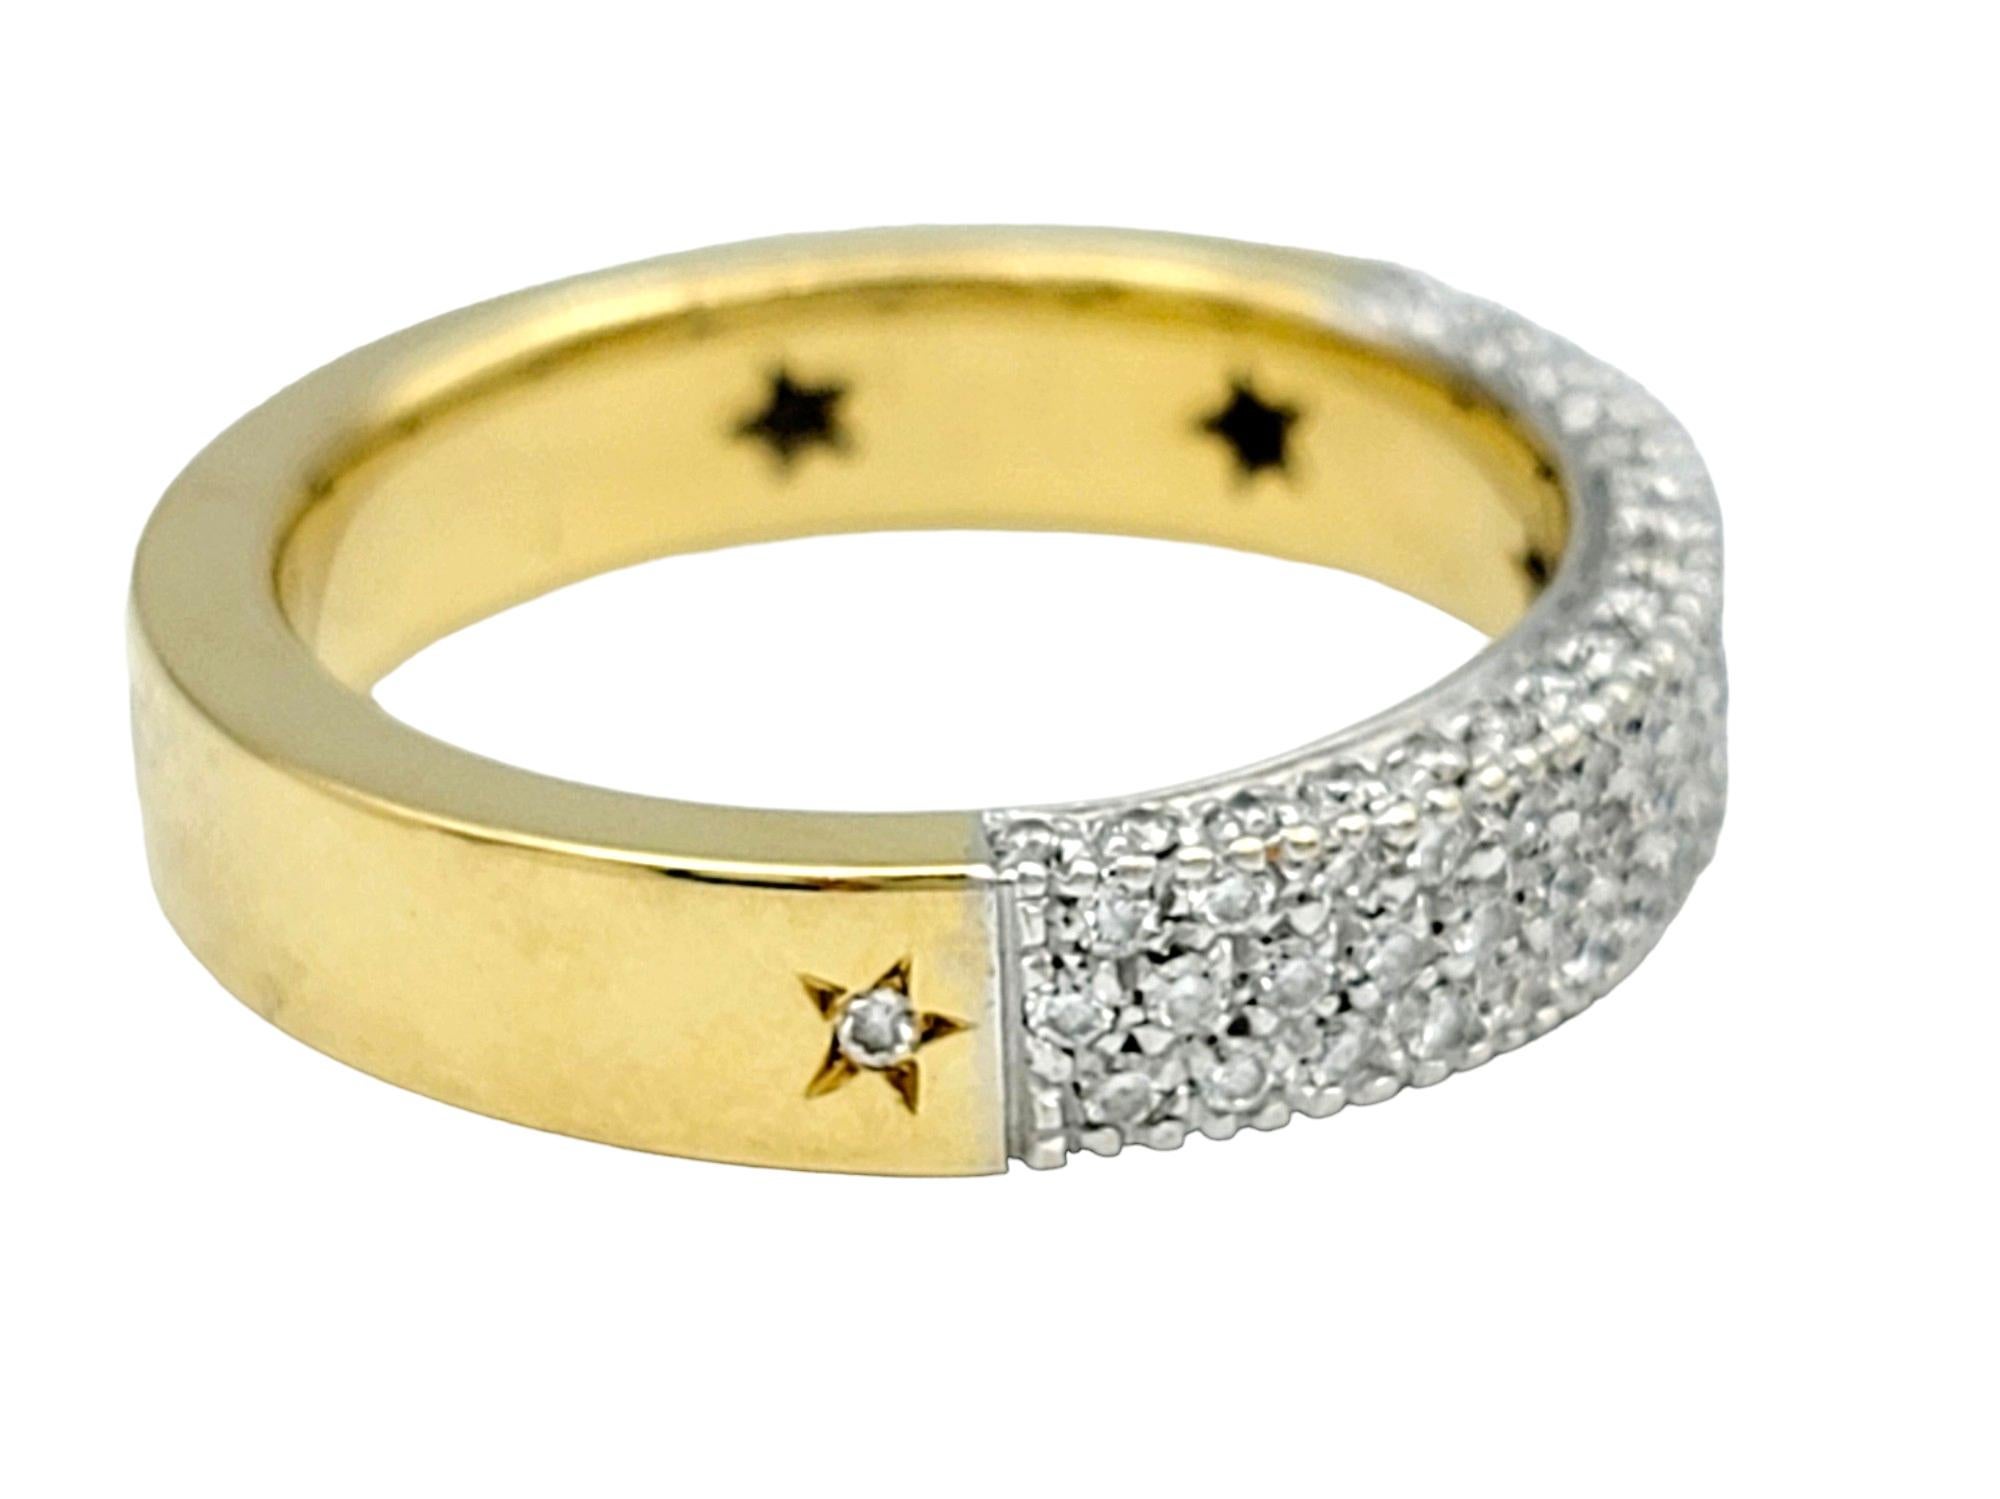 H. Stern Triple Row Diamond Band Ring with Star Designs in 18 Karat Yellow Gold For Sale 1